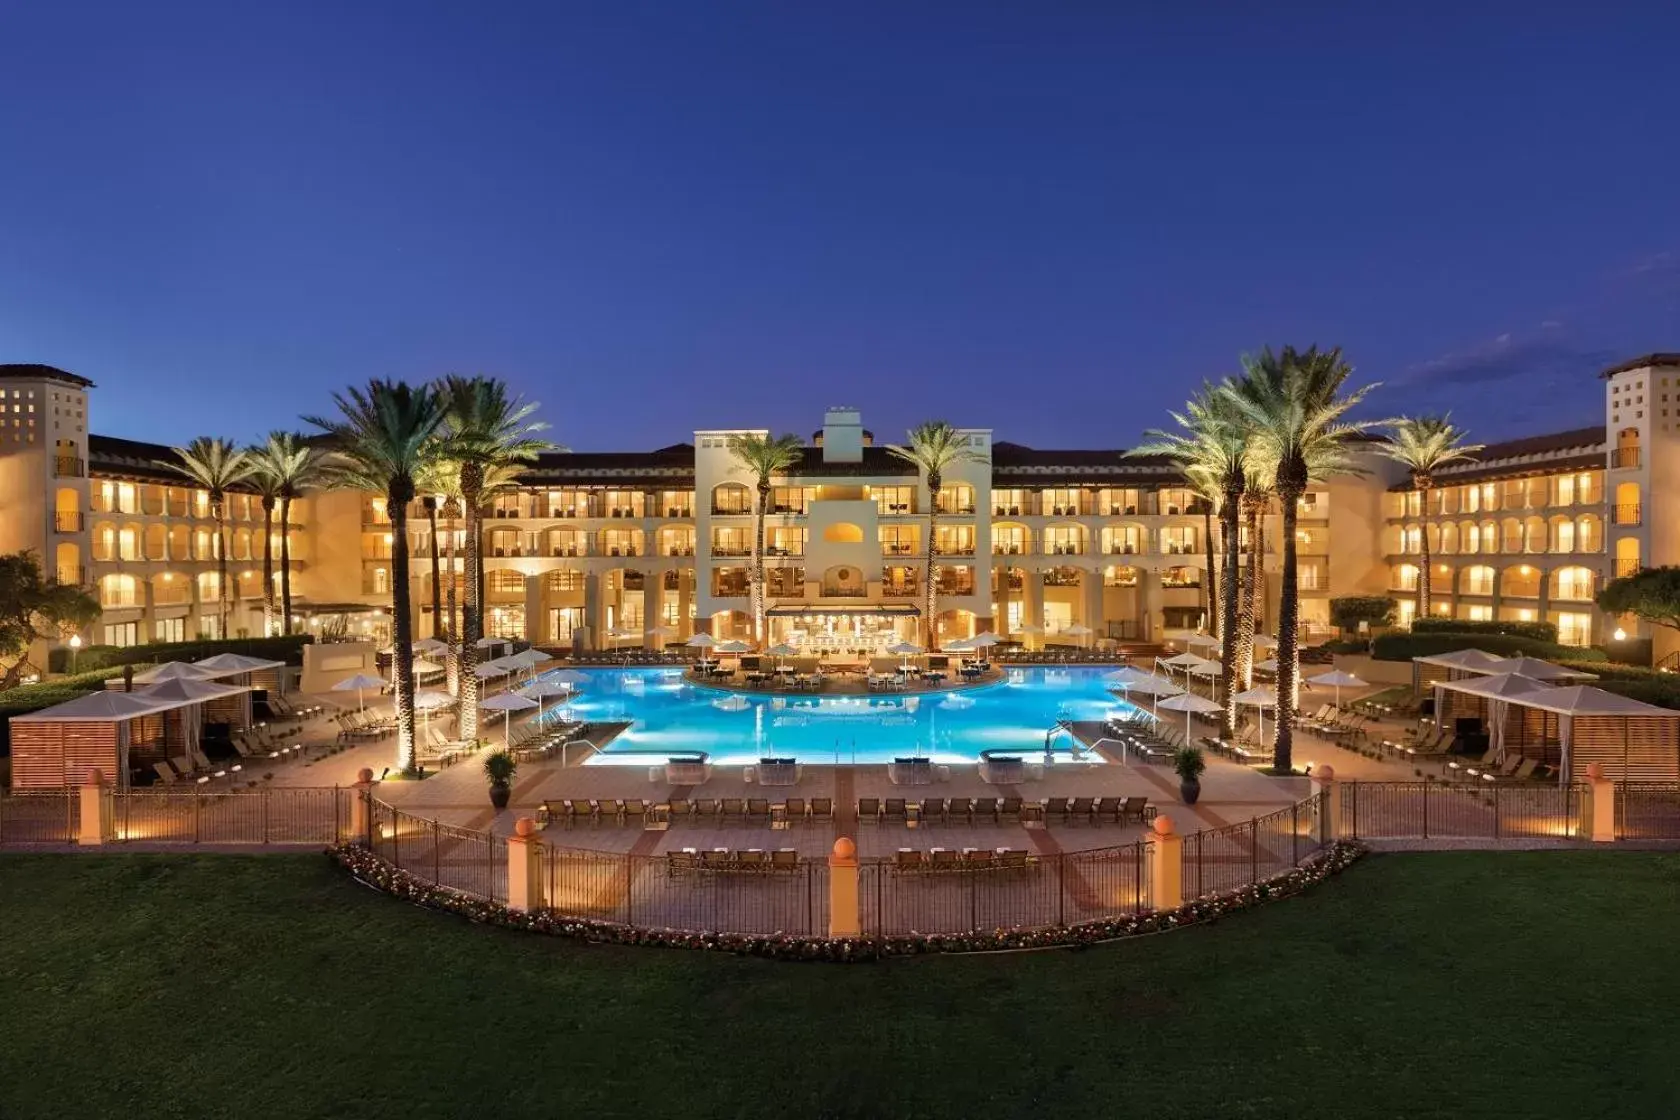 Property building, Pool View in Fairmont Scottsdale Princess